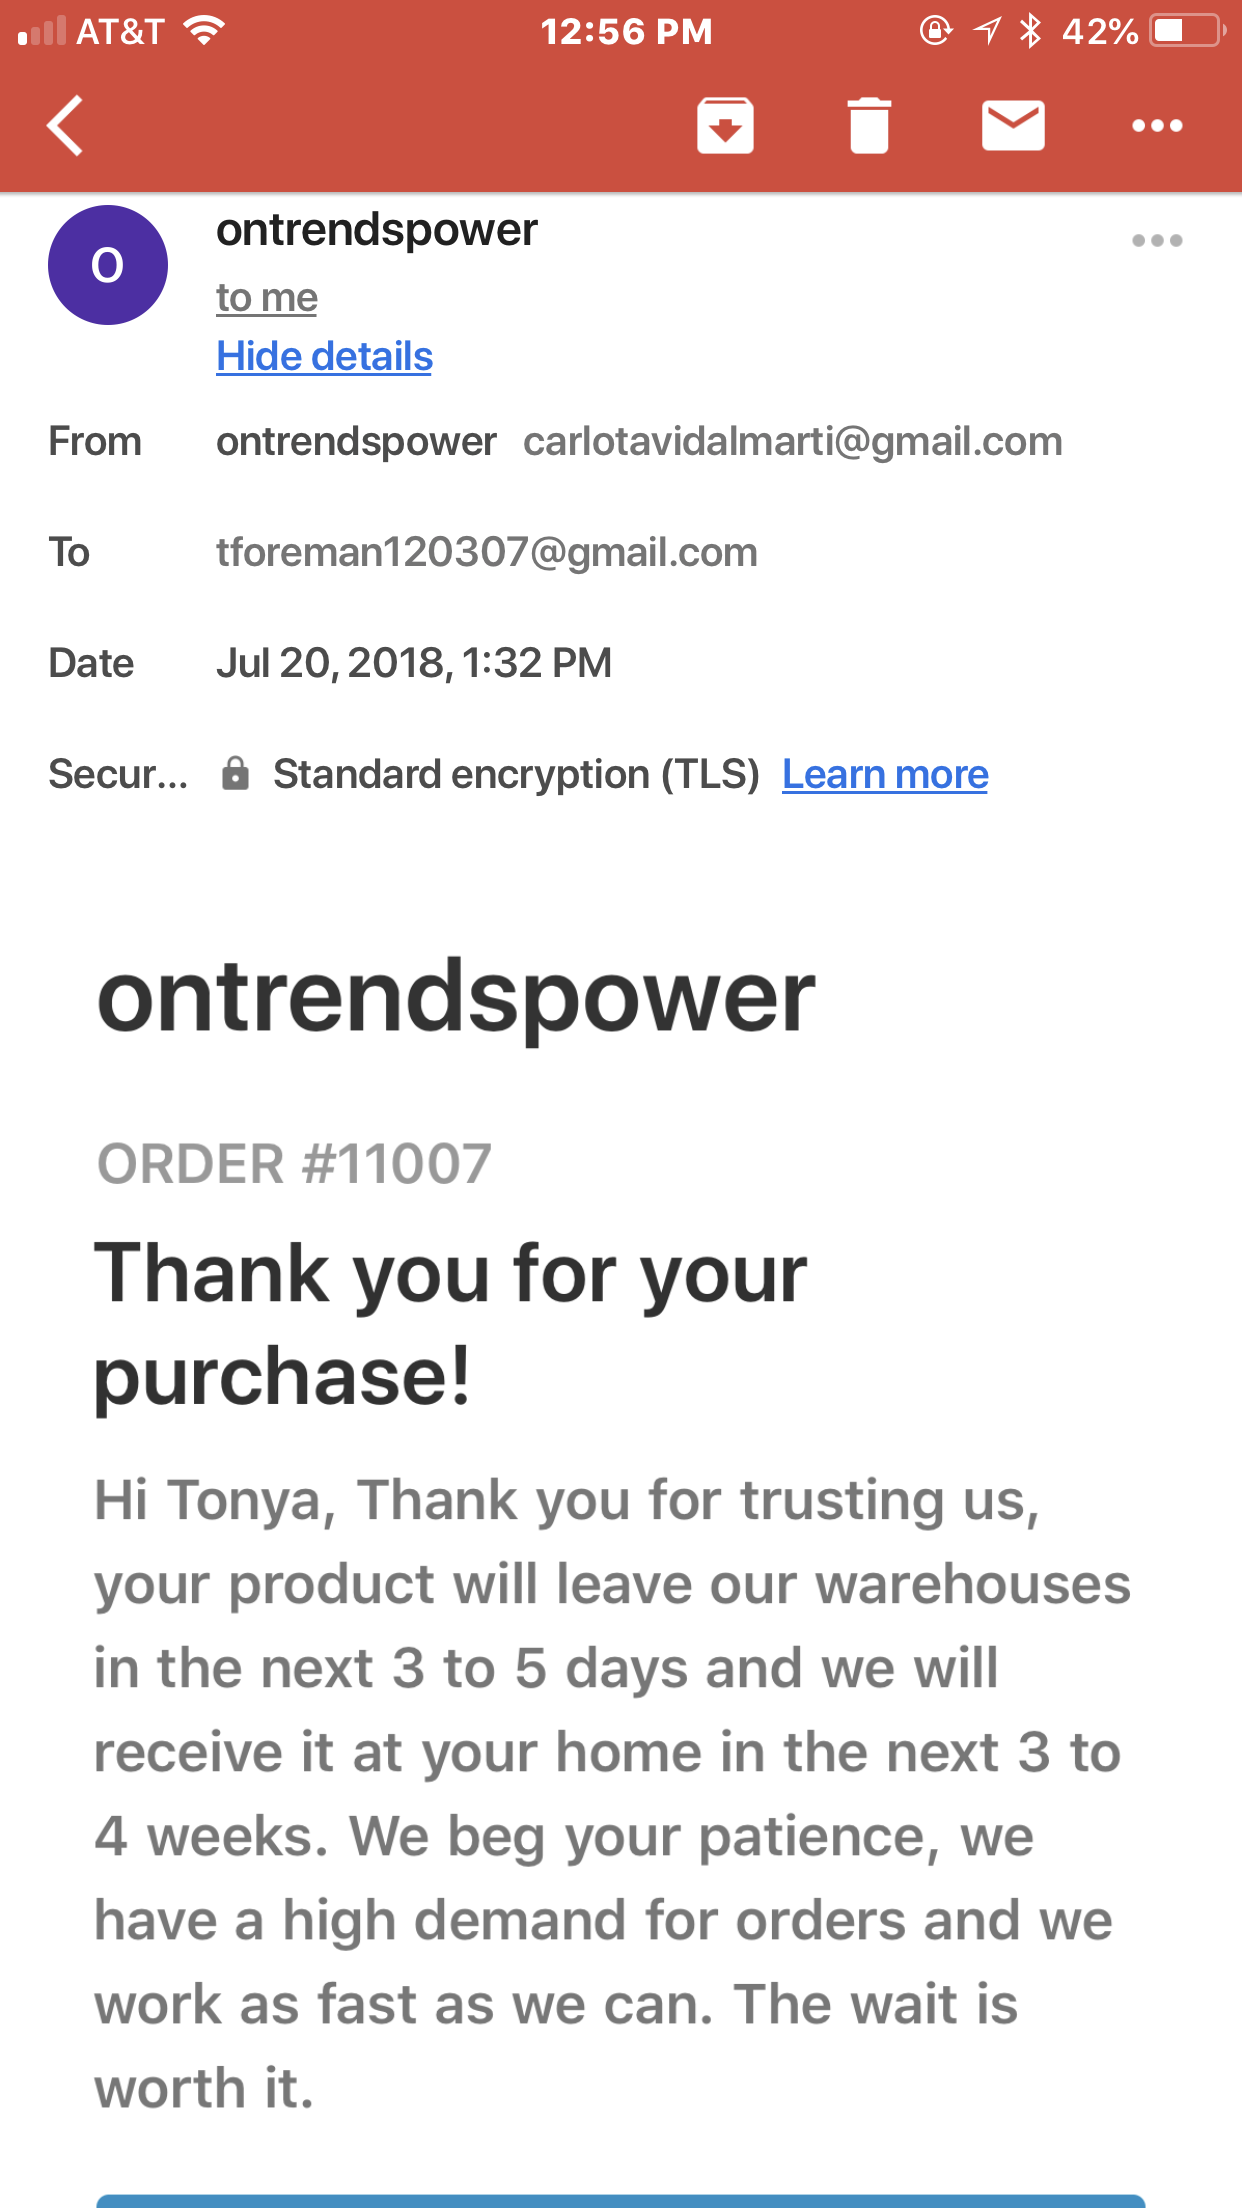 From the ontrendspower my order “confirmation “